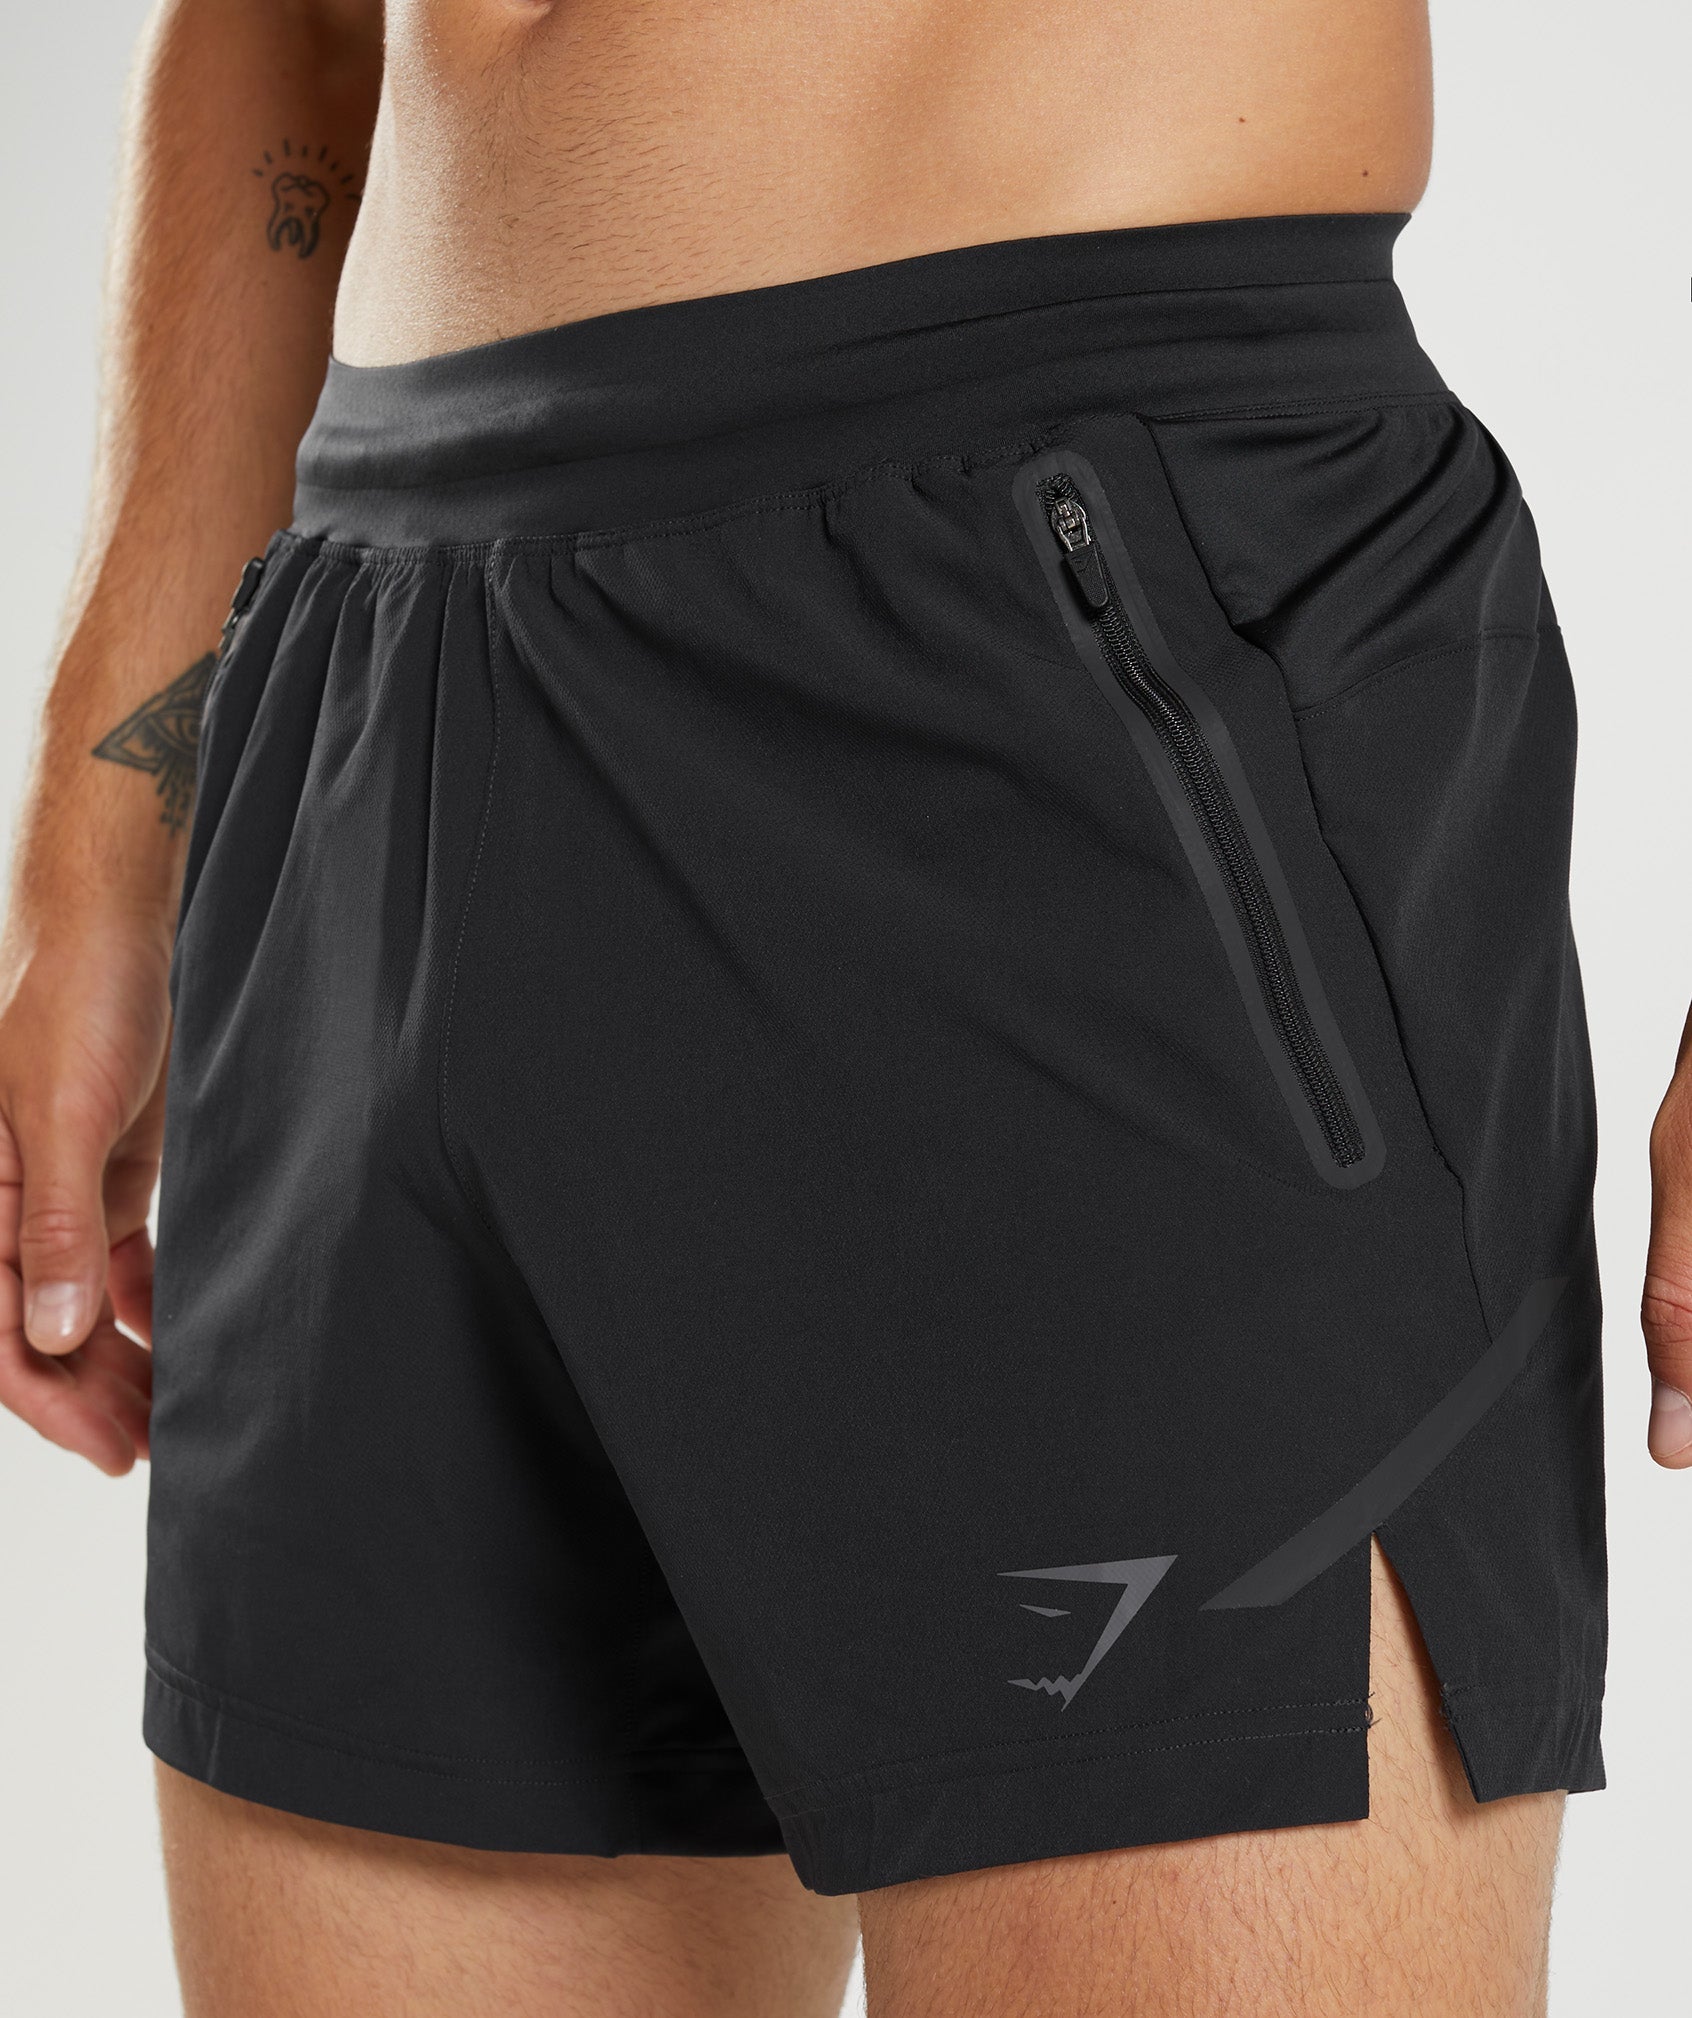 Apex 5" Perform Shorts in Black - view 6